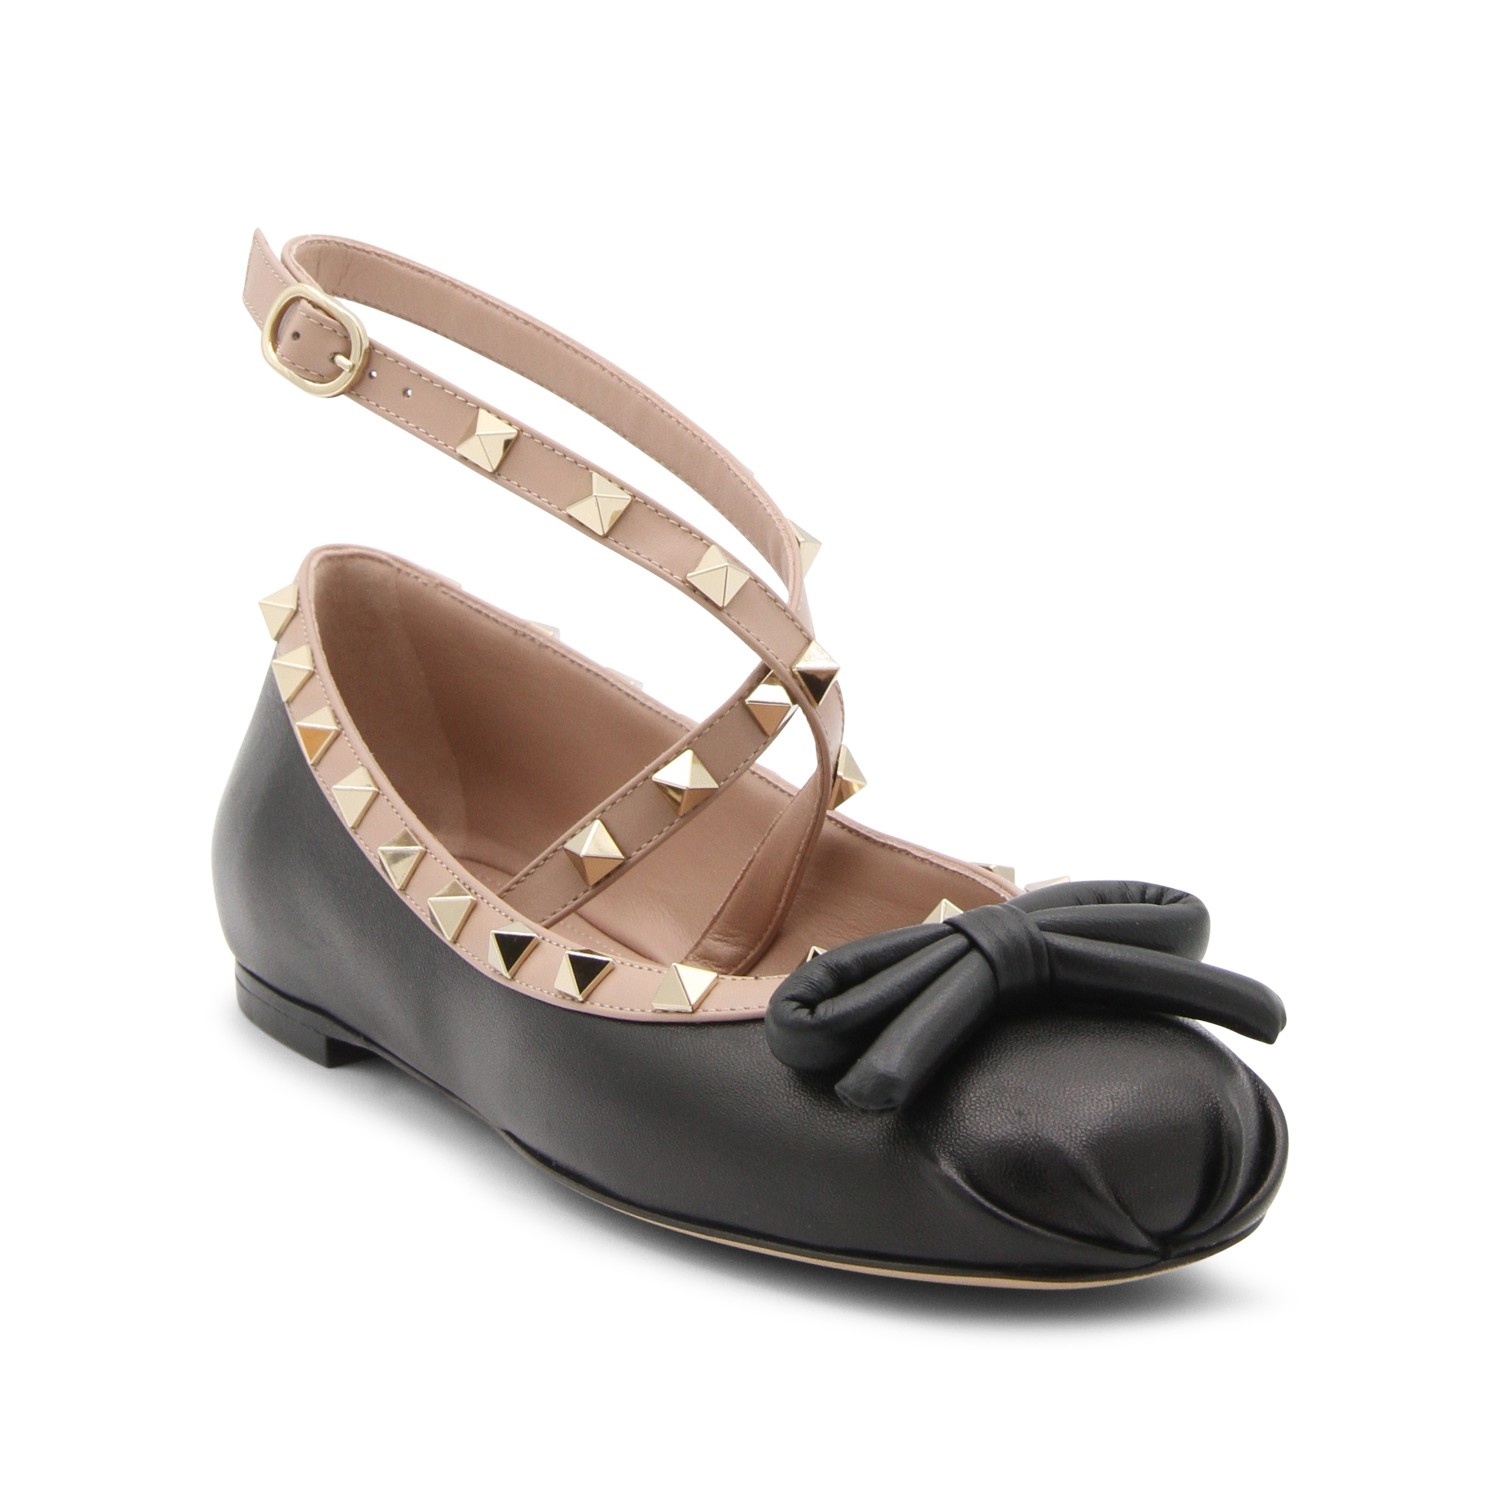 BLACK AND POUDRE PINK LEATHER BALLERINA SHOES - 2